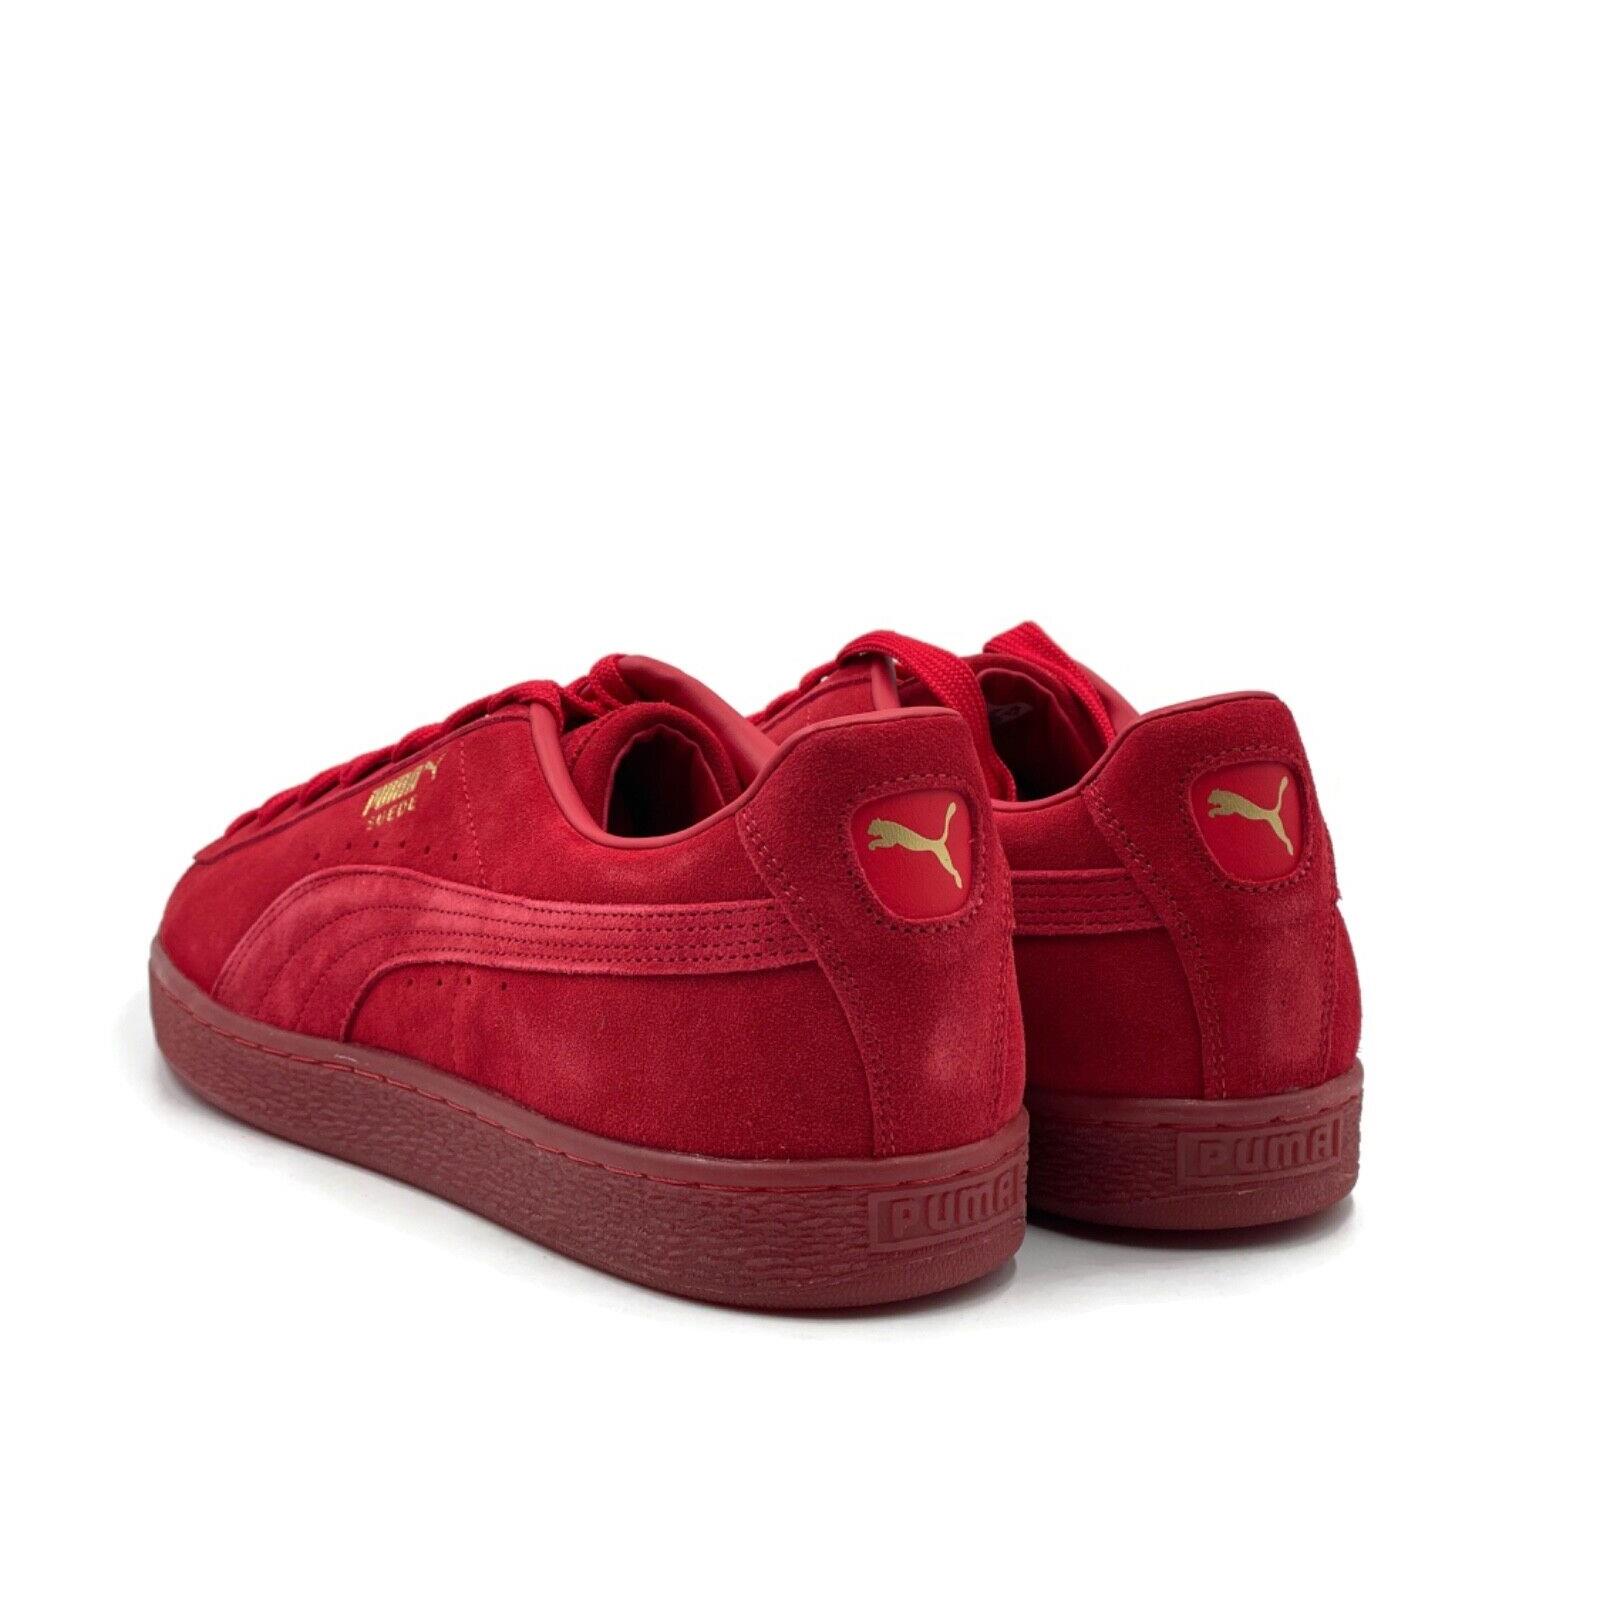 Puma shoes Suede Classic Mono Gold - Red Gold 3